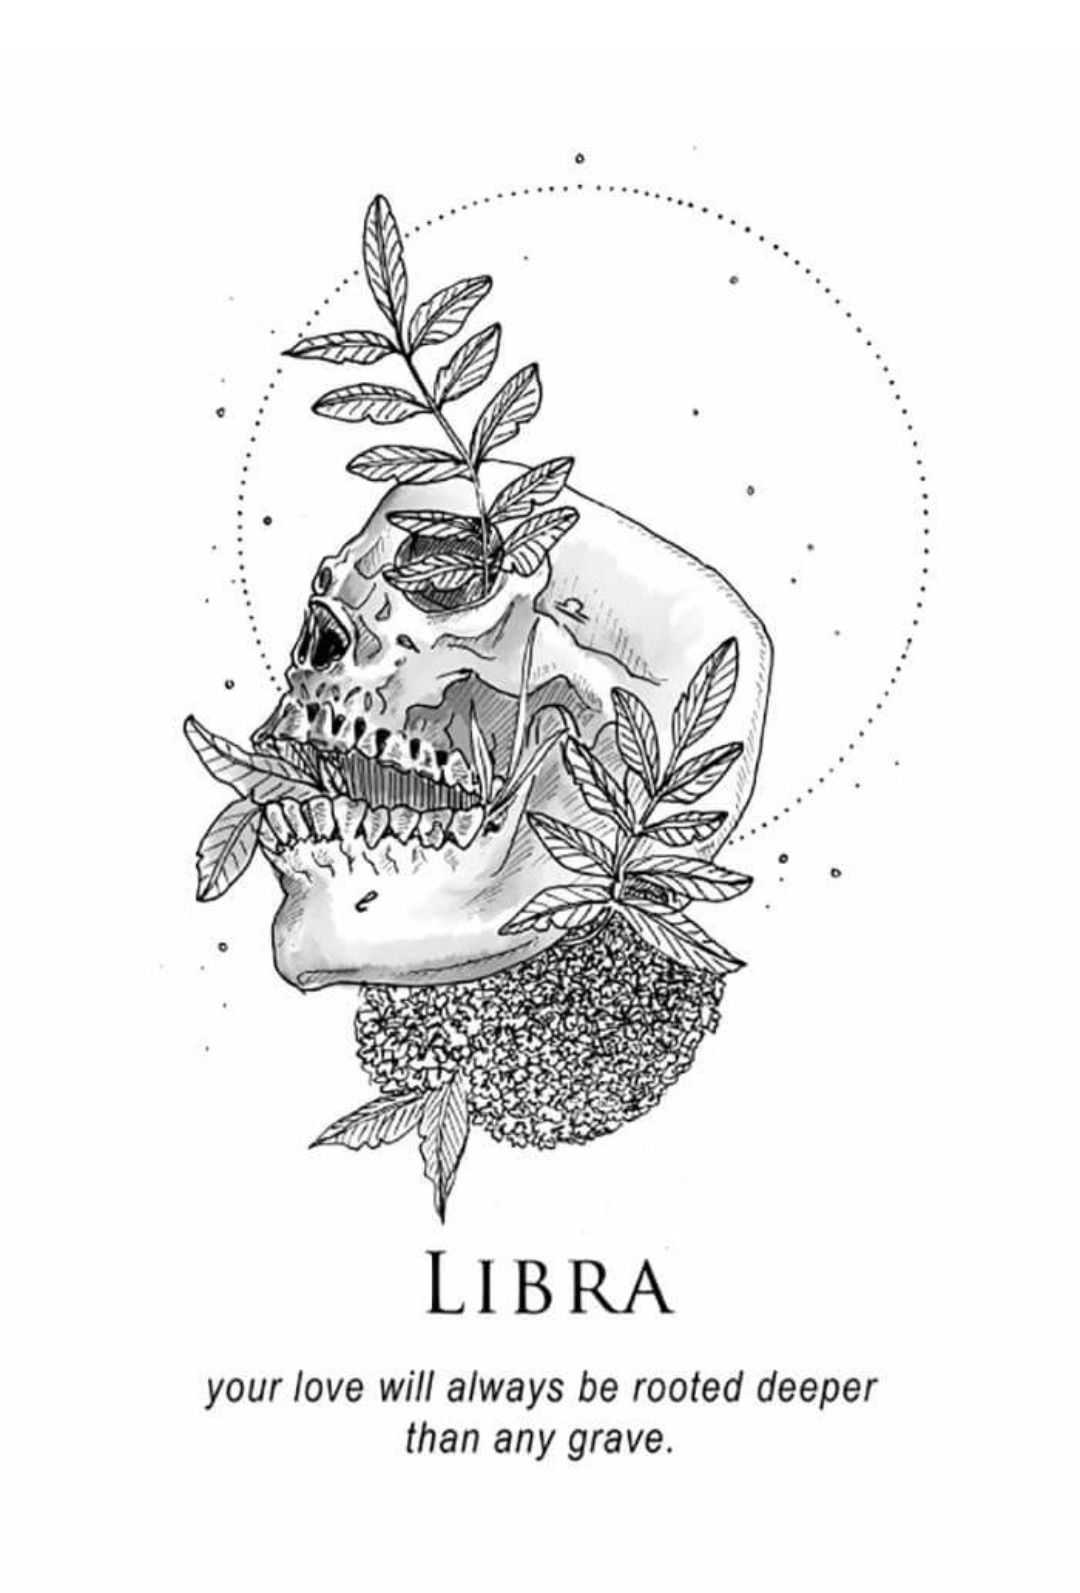 An illustration of a skull with leaves and flowers growing out of it. - Libra